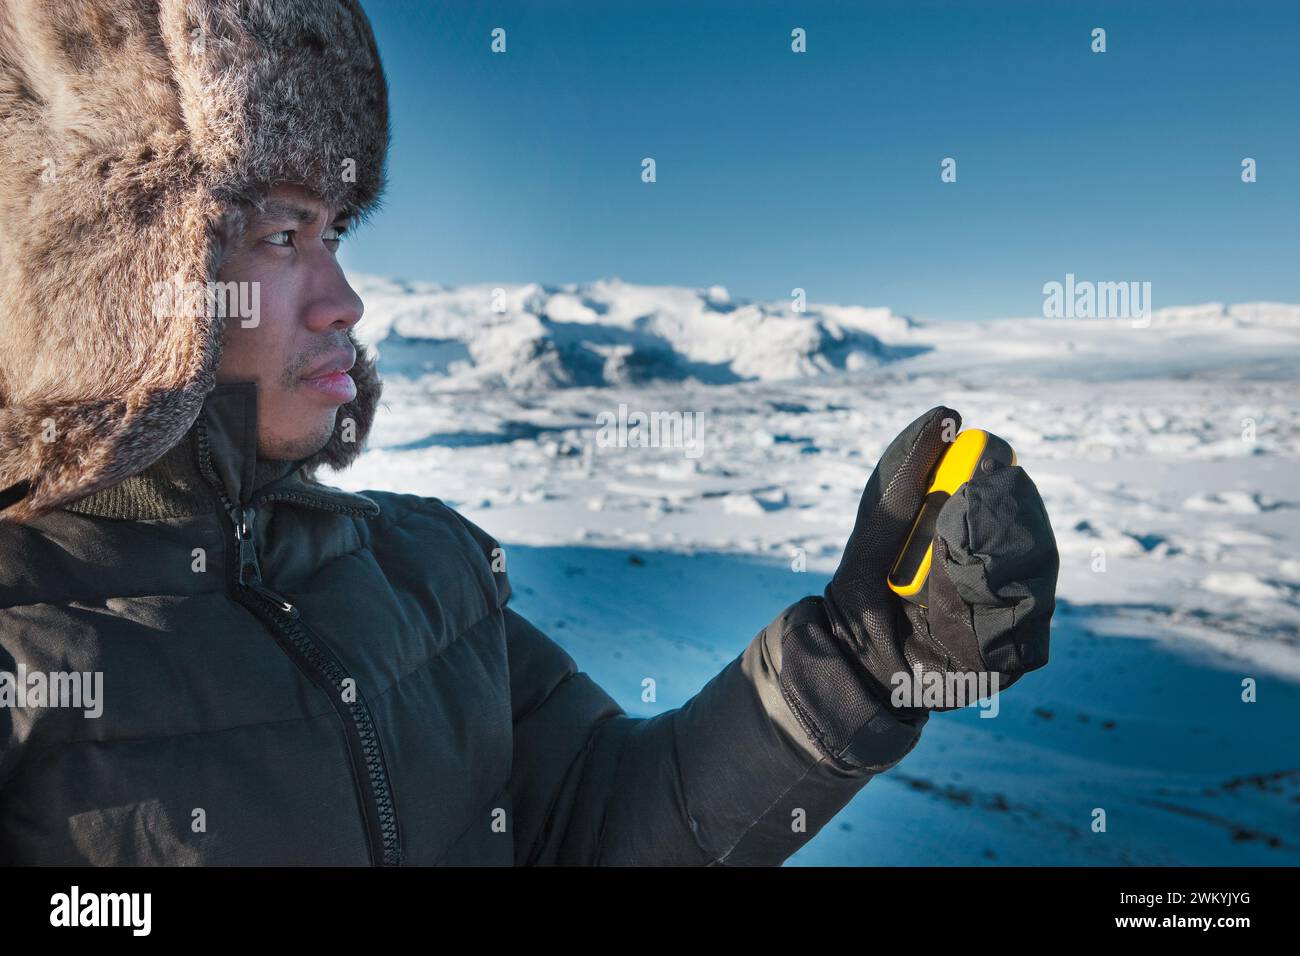 Man navigating in winter lnadscape Stock Photo